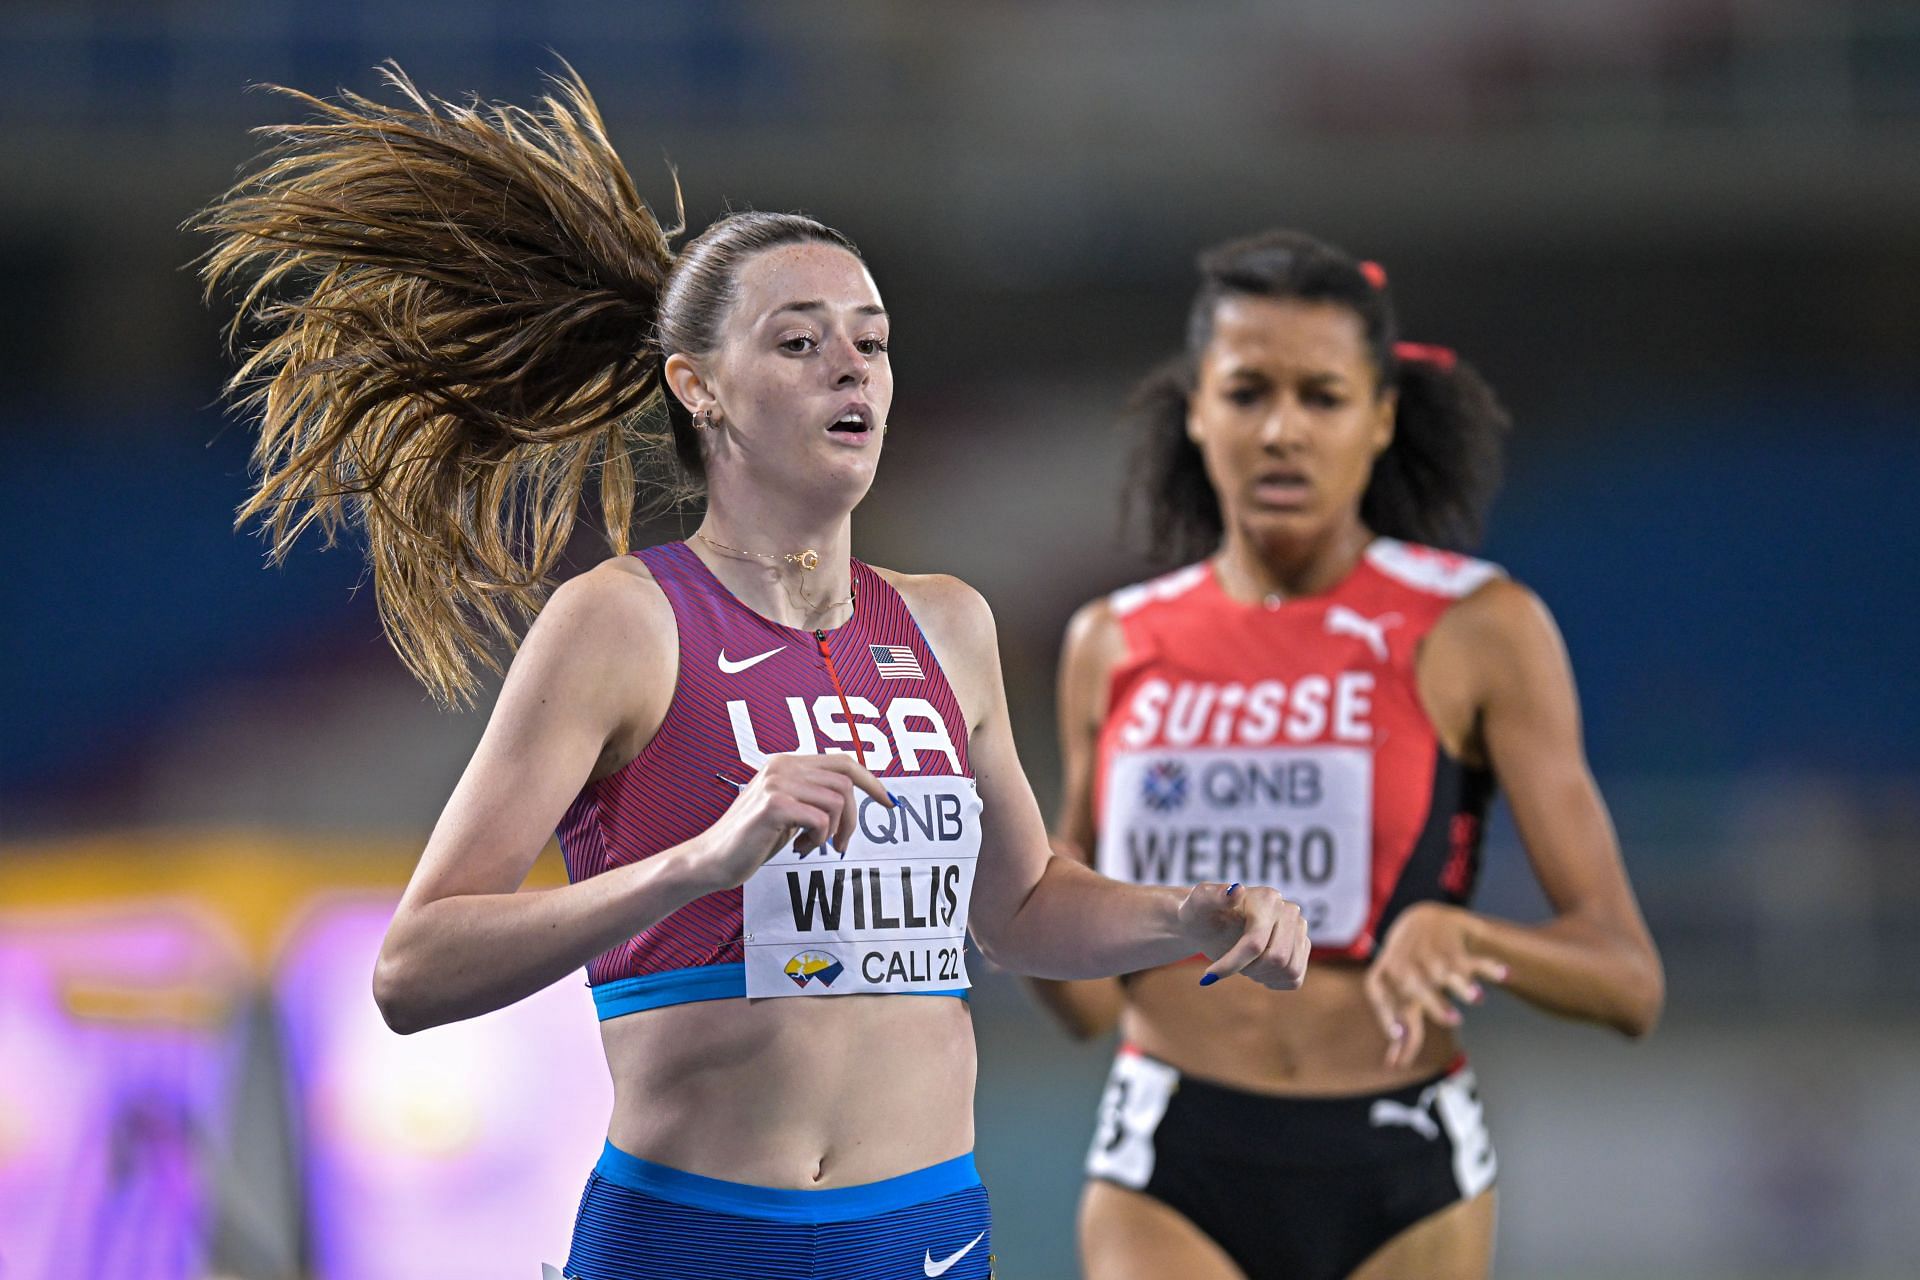 World Athletics U20 Championships 2022 Livestream links and how to watch on TV explored